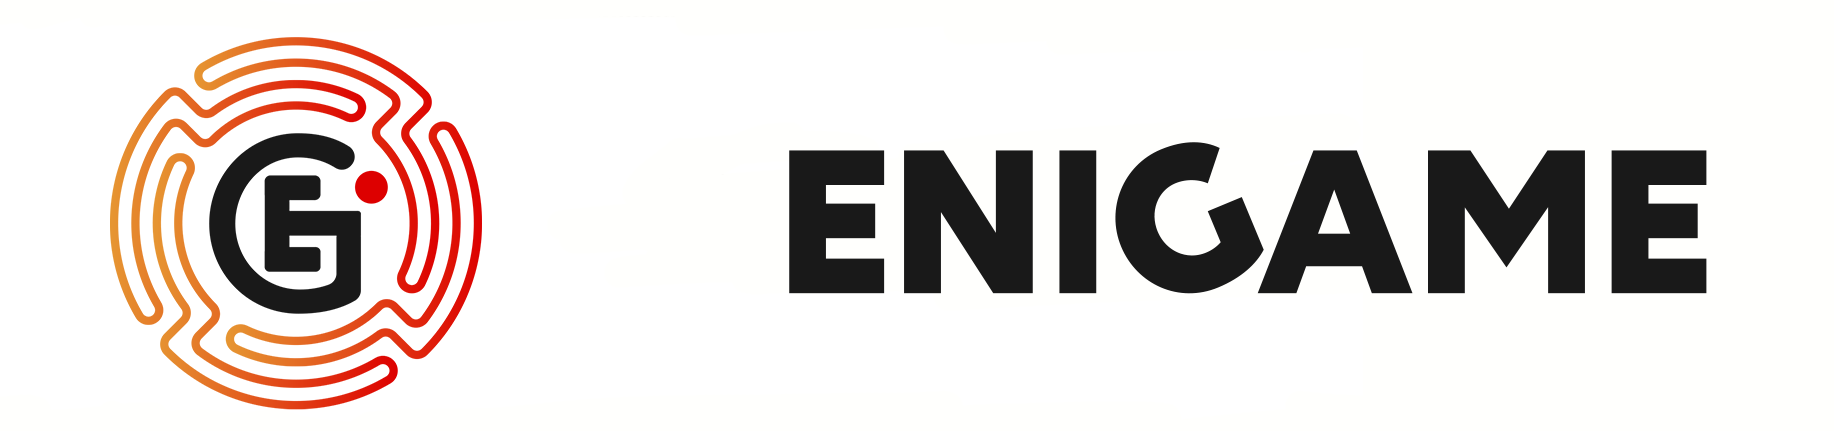 Enigame